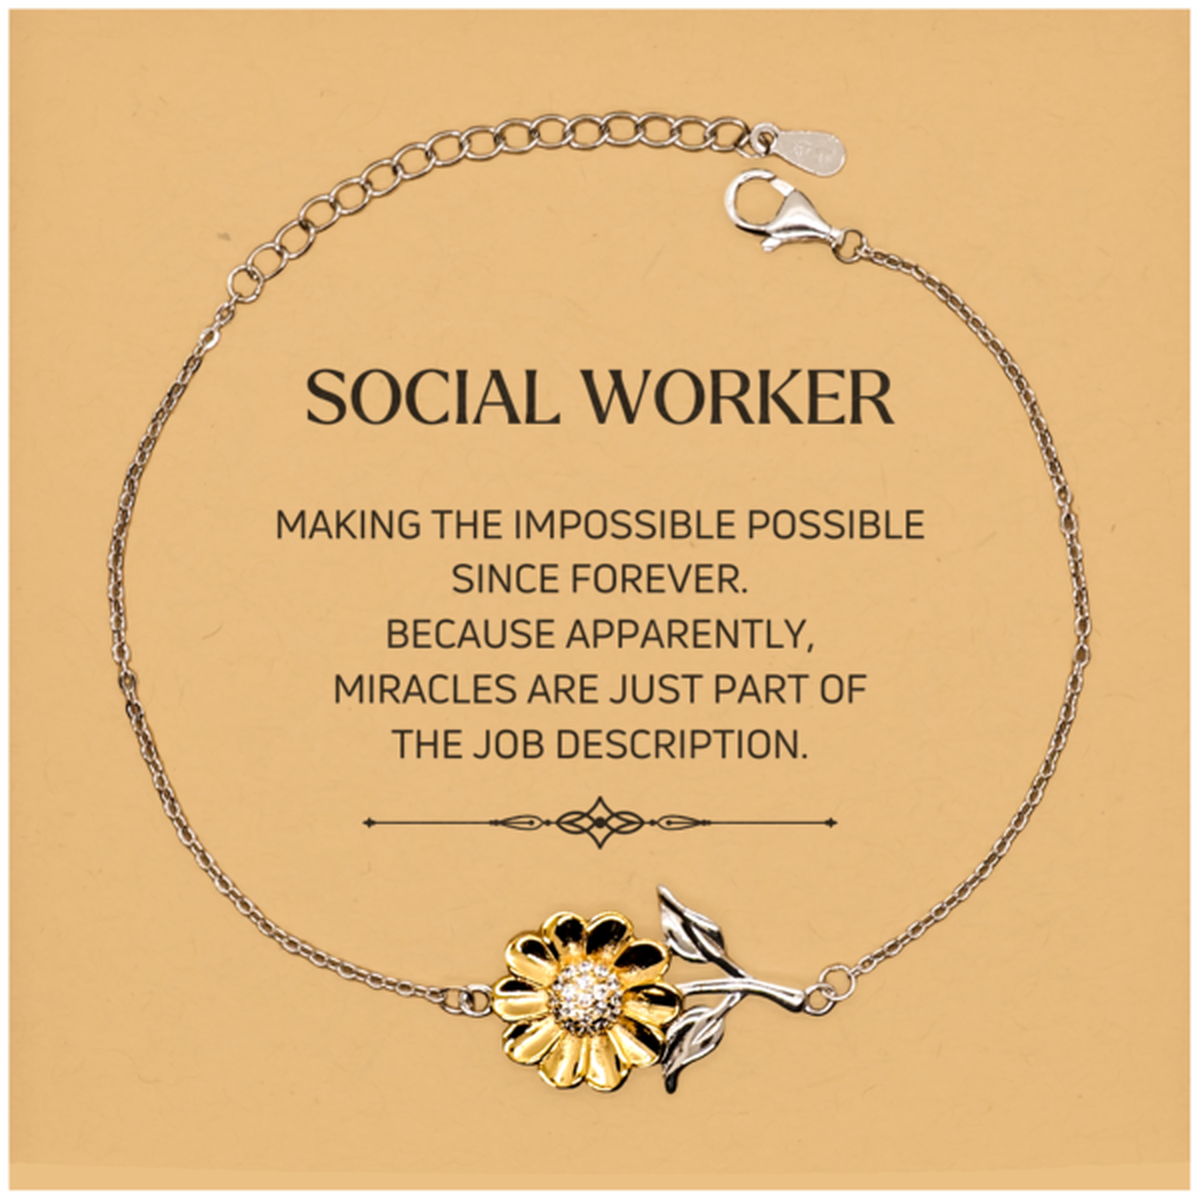 Funny Social Worker Gifts, Miracles are just part of the job description, Inspirational Birthday Christmas Sunflower Bracelet For Social Worker, Men, Women, Coworkers, Friends, Boss